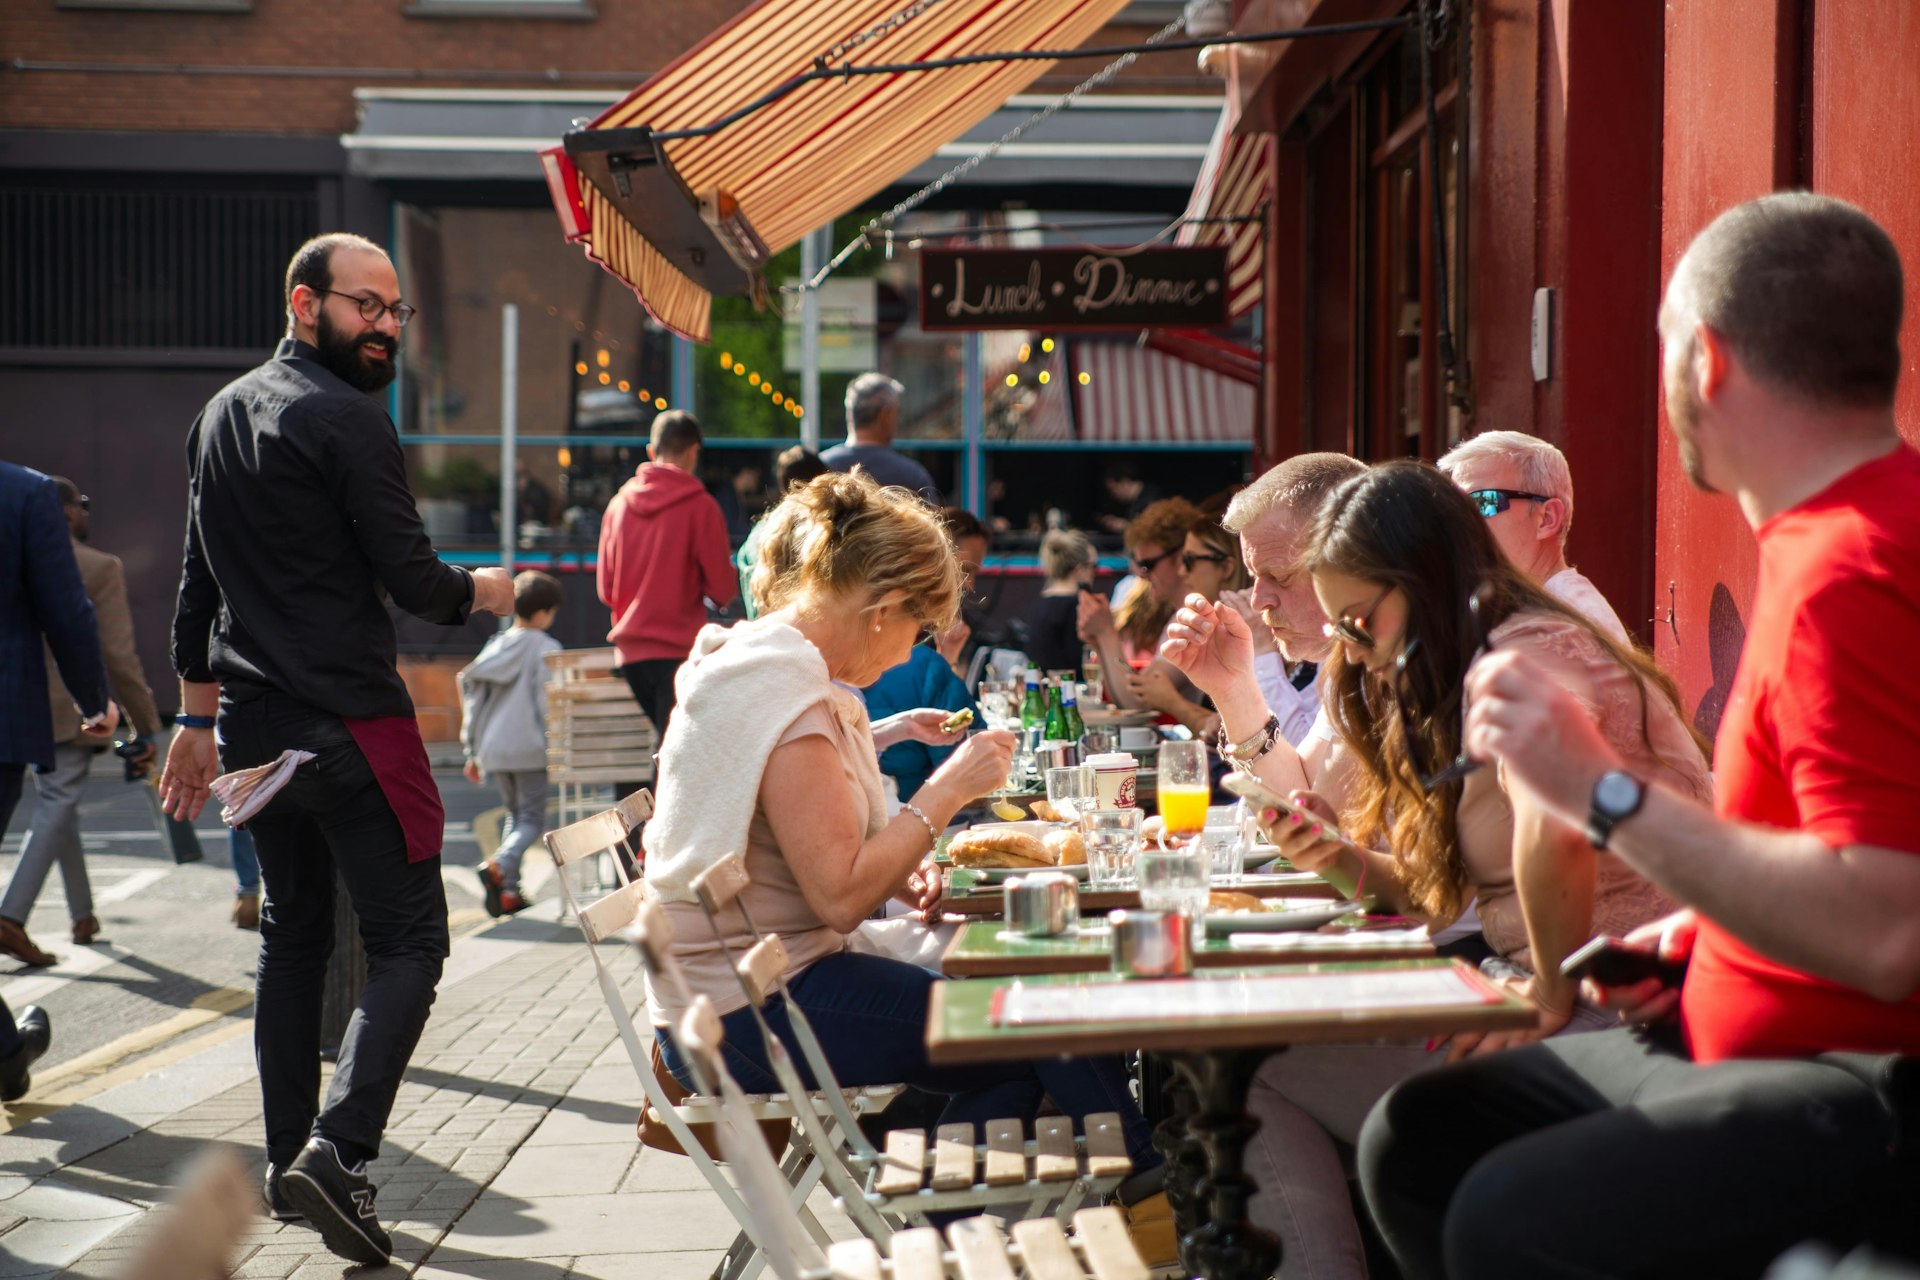 People dining on outdoor tables in the sun.